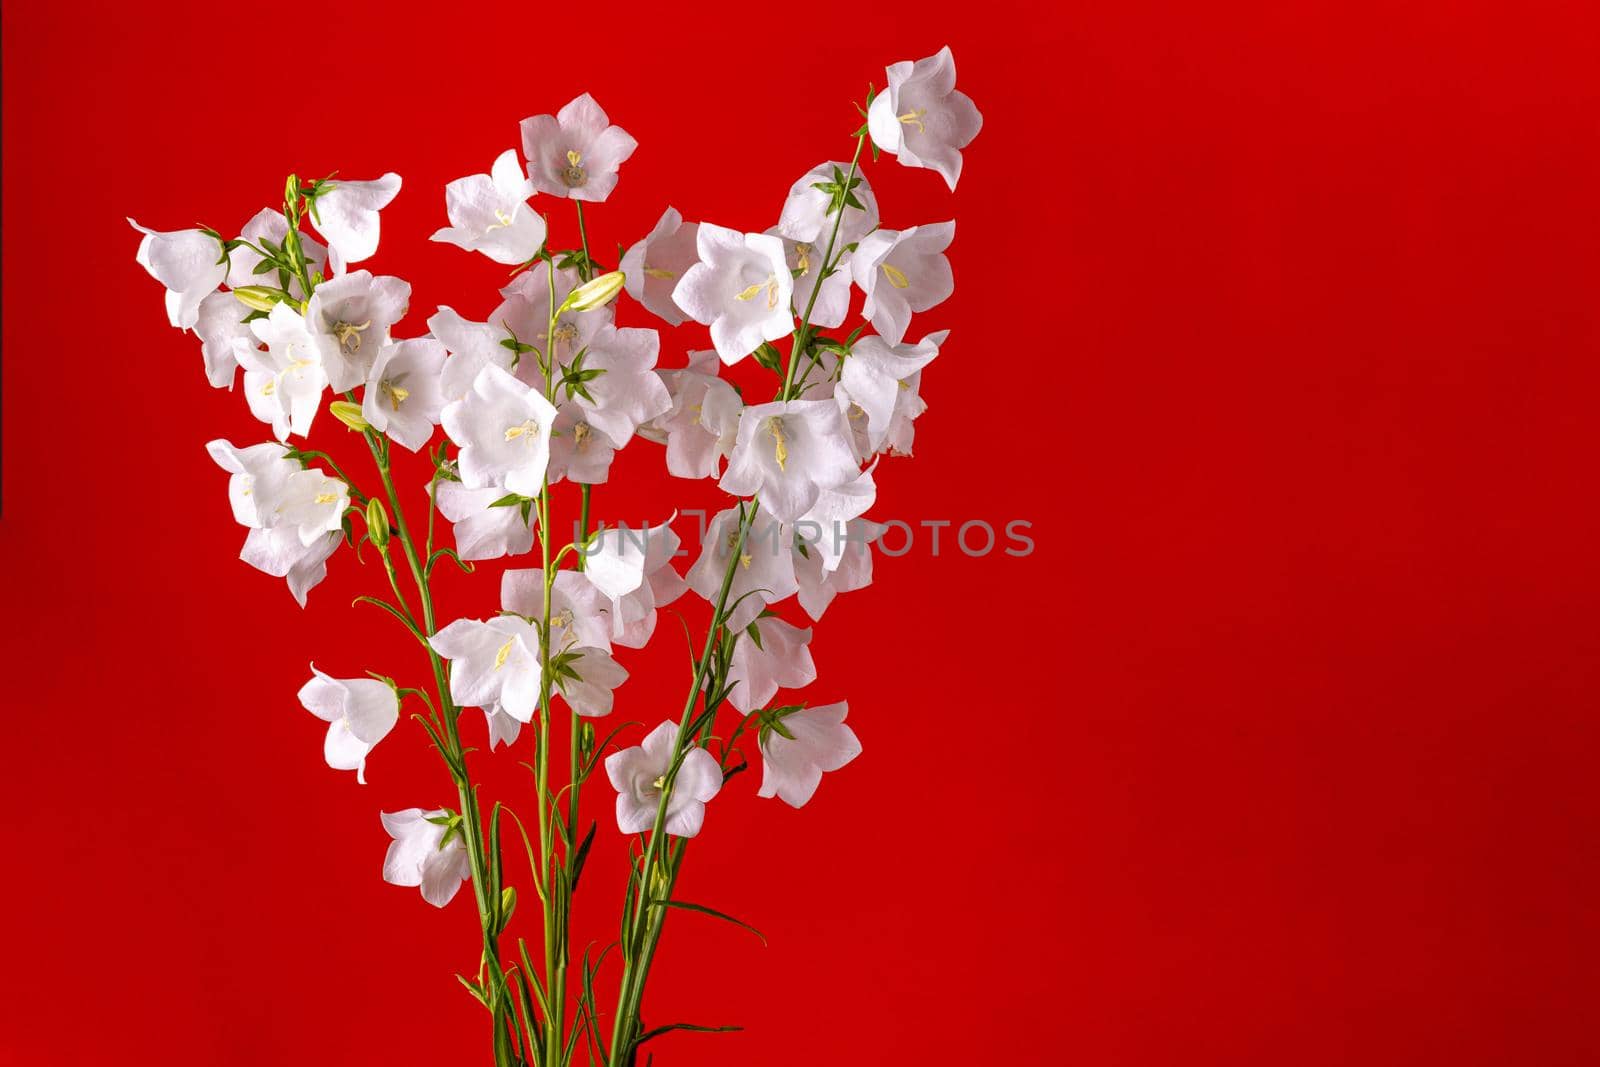 A bouquet of flowers bells on a red background